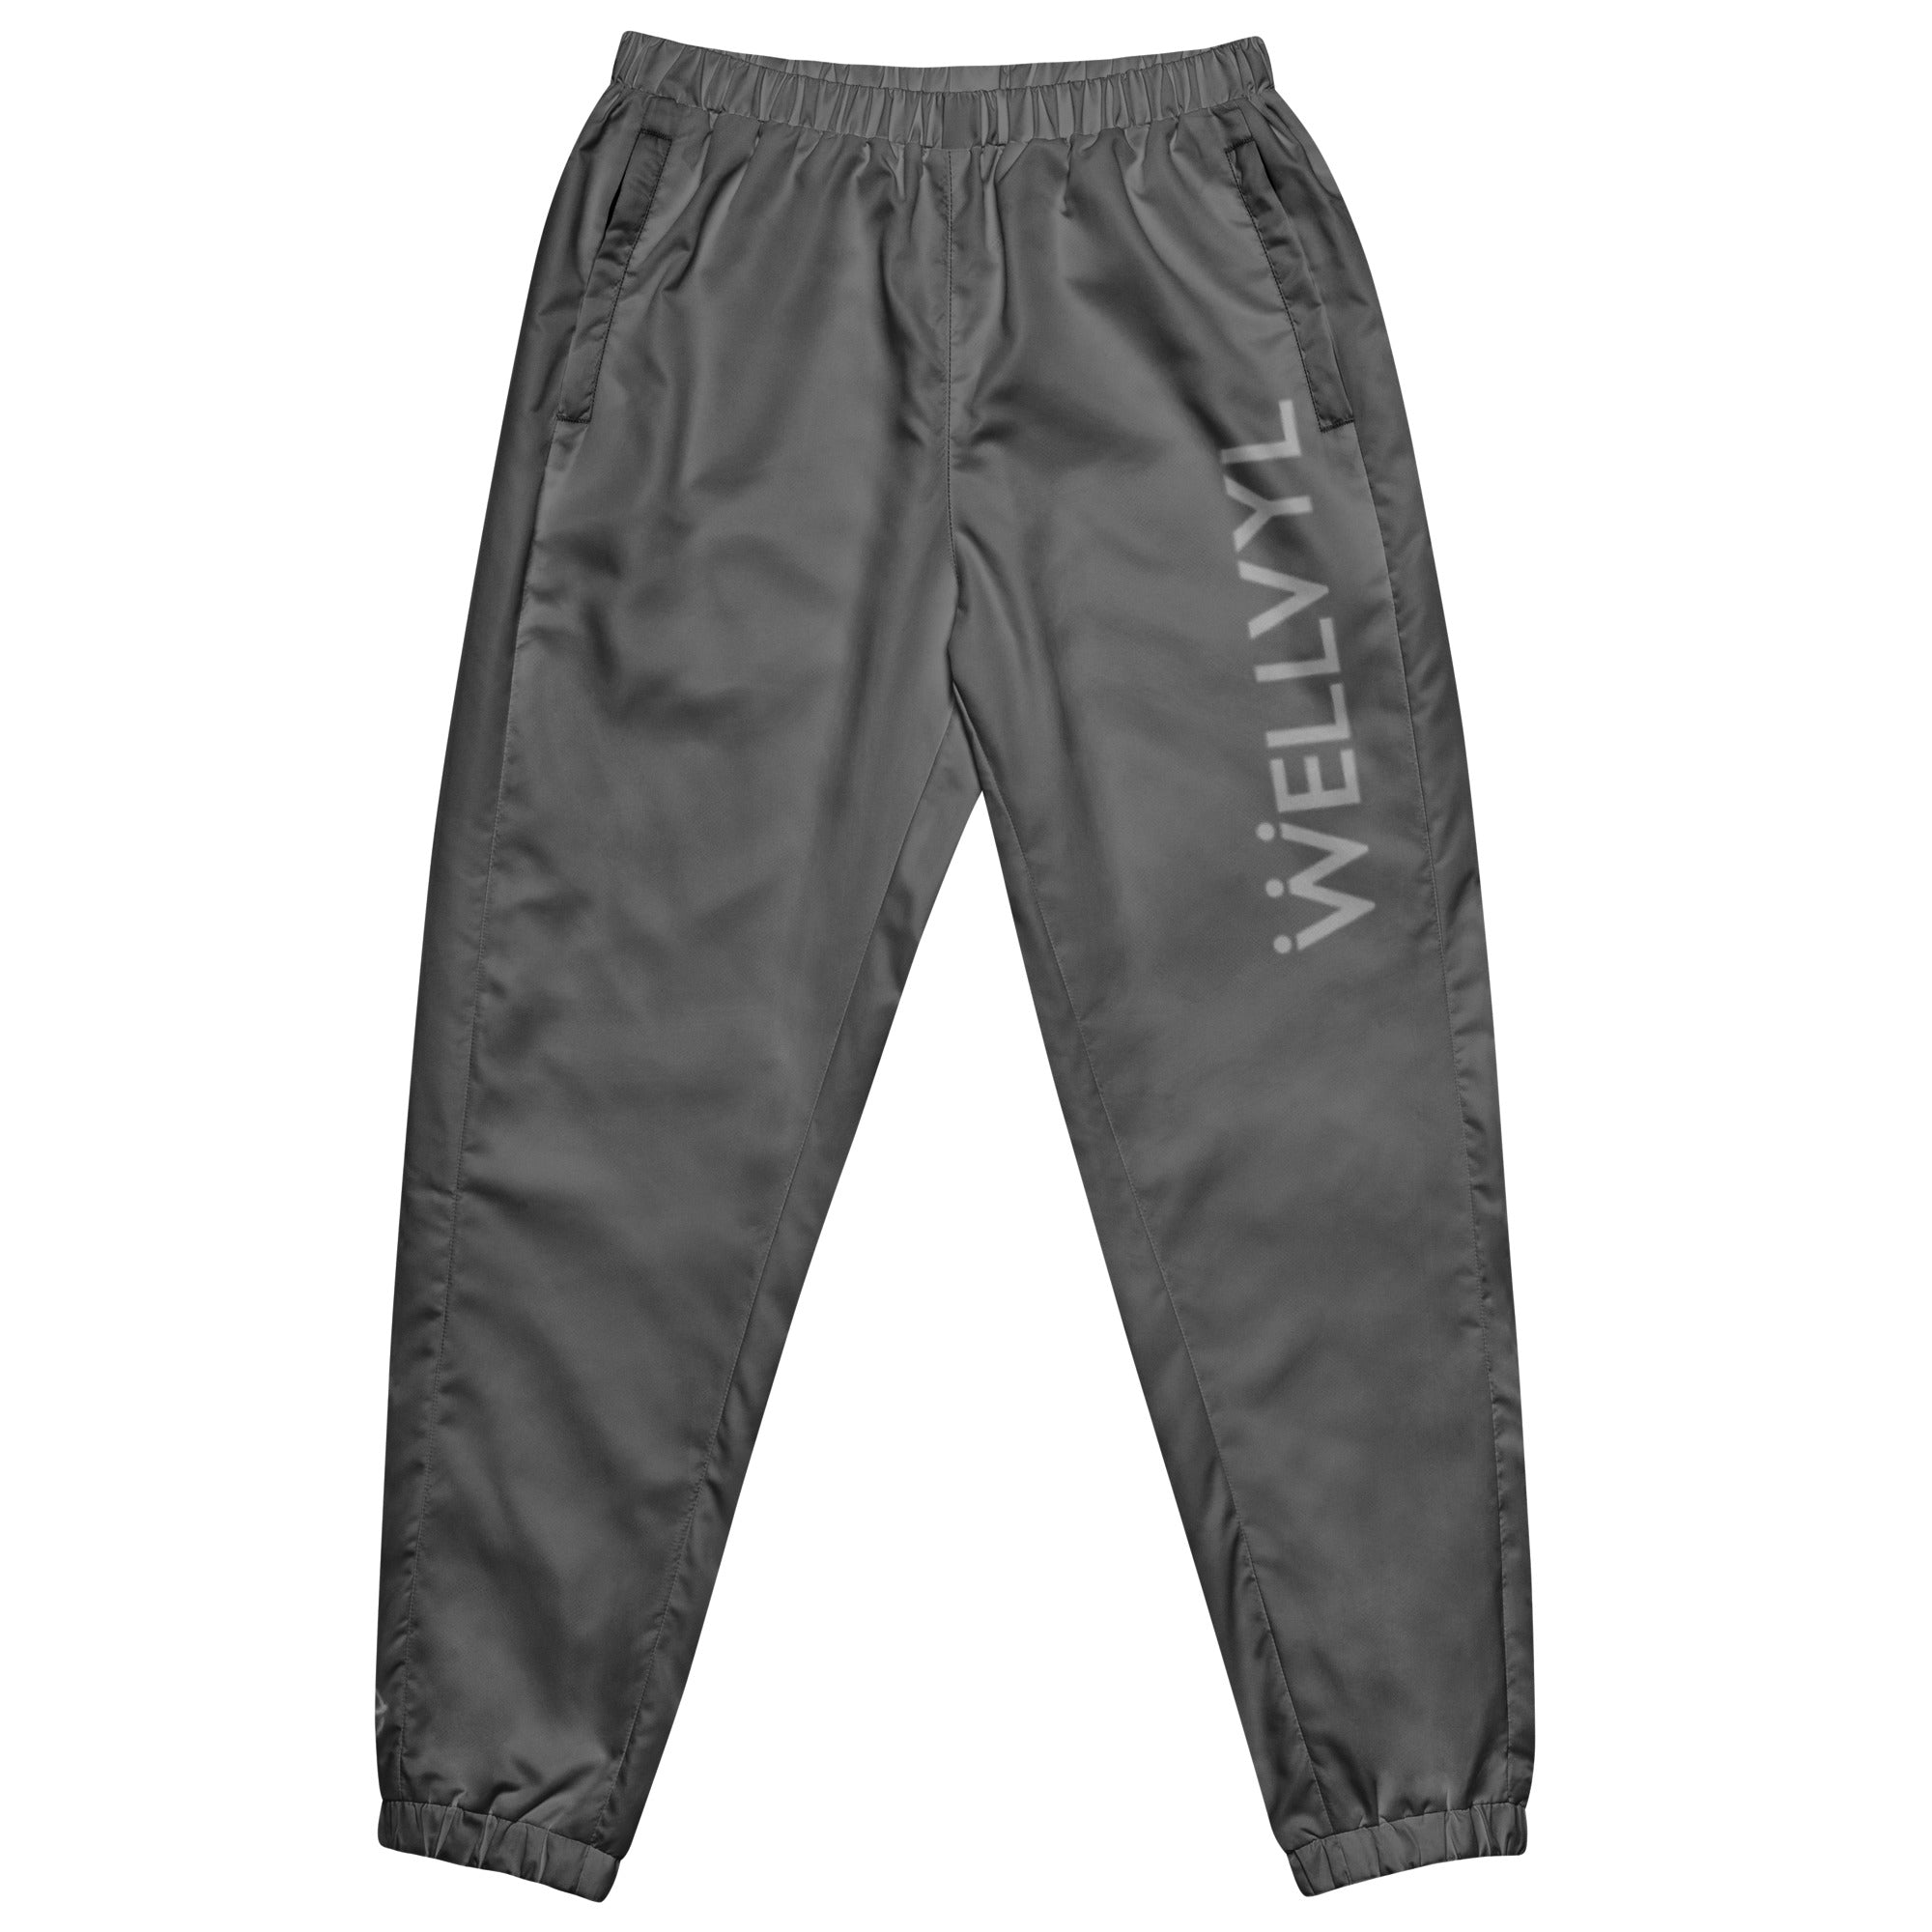 The W Track Pant